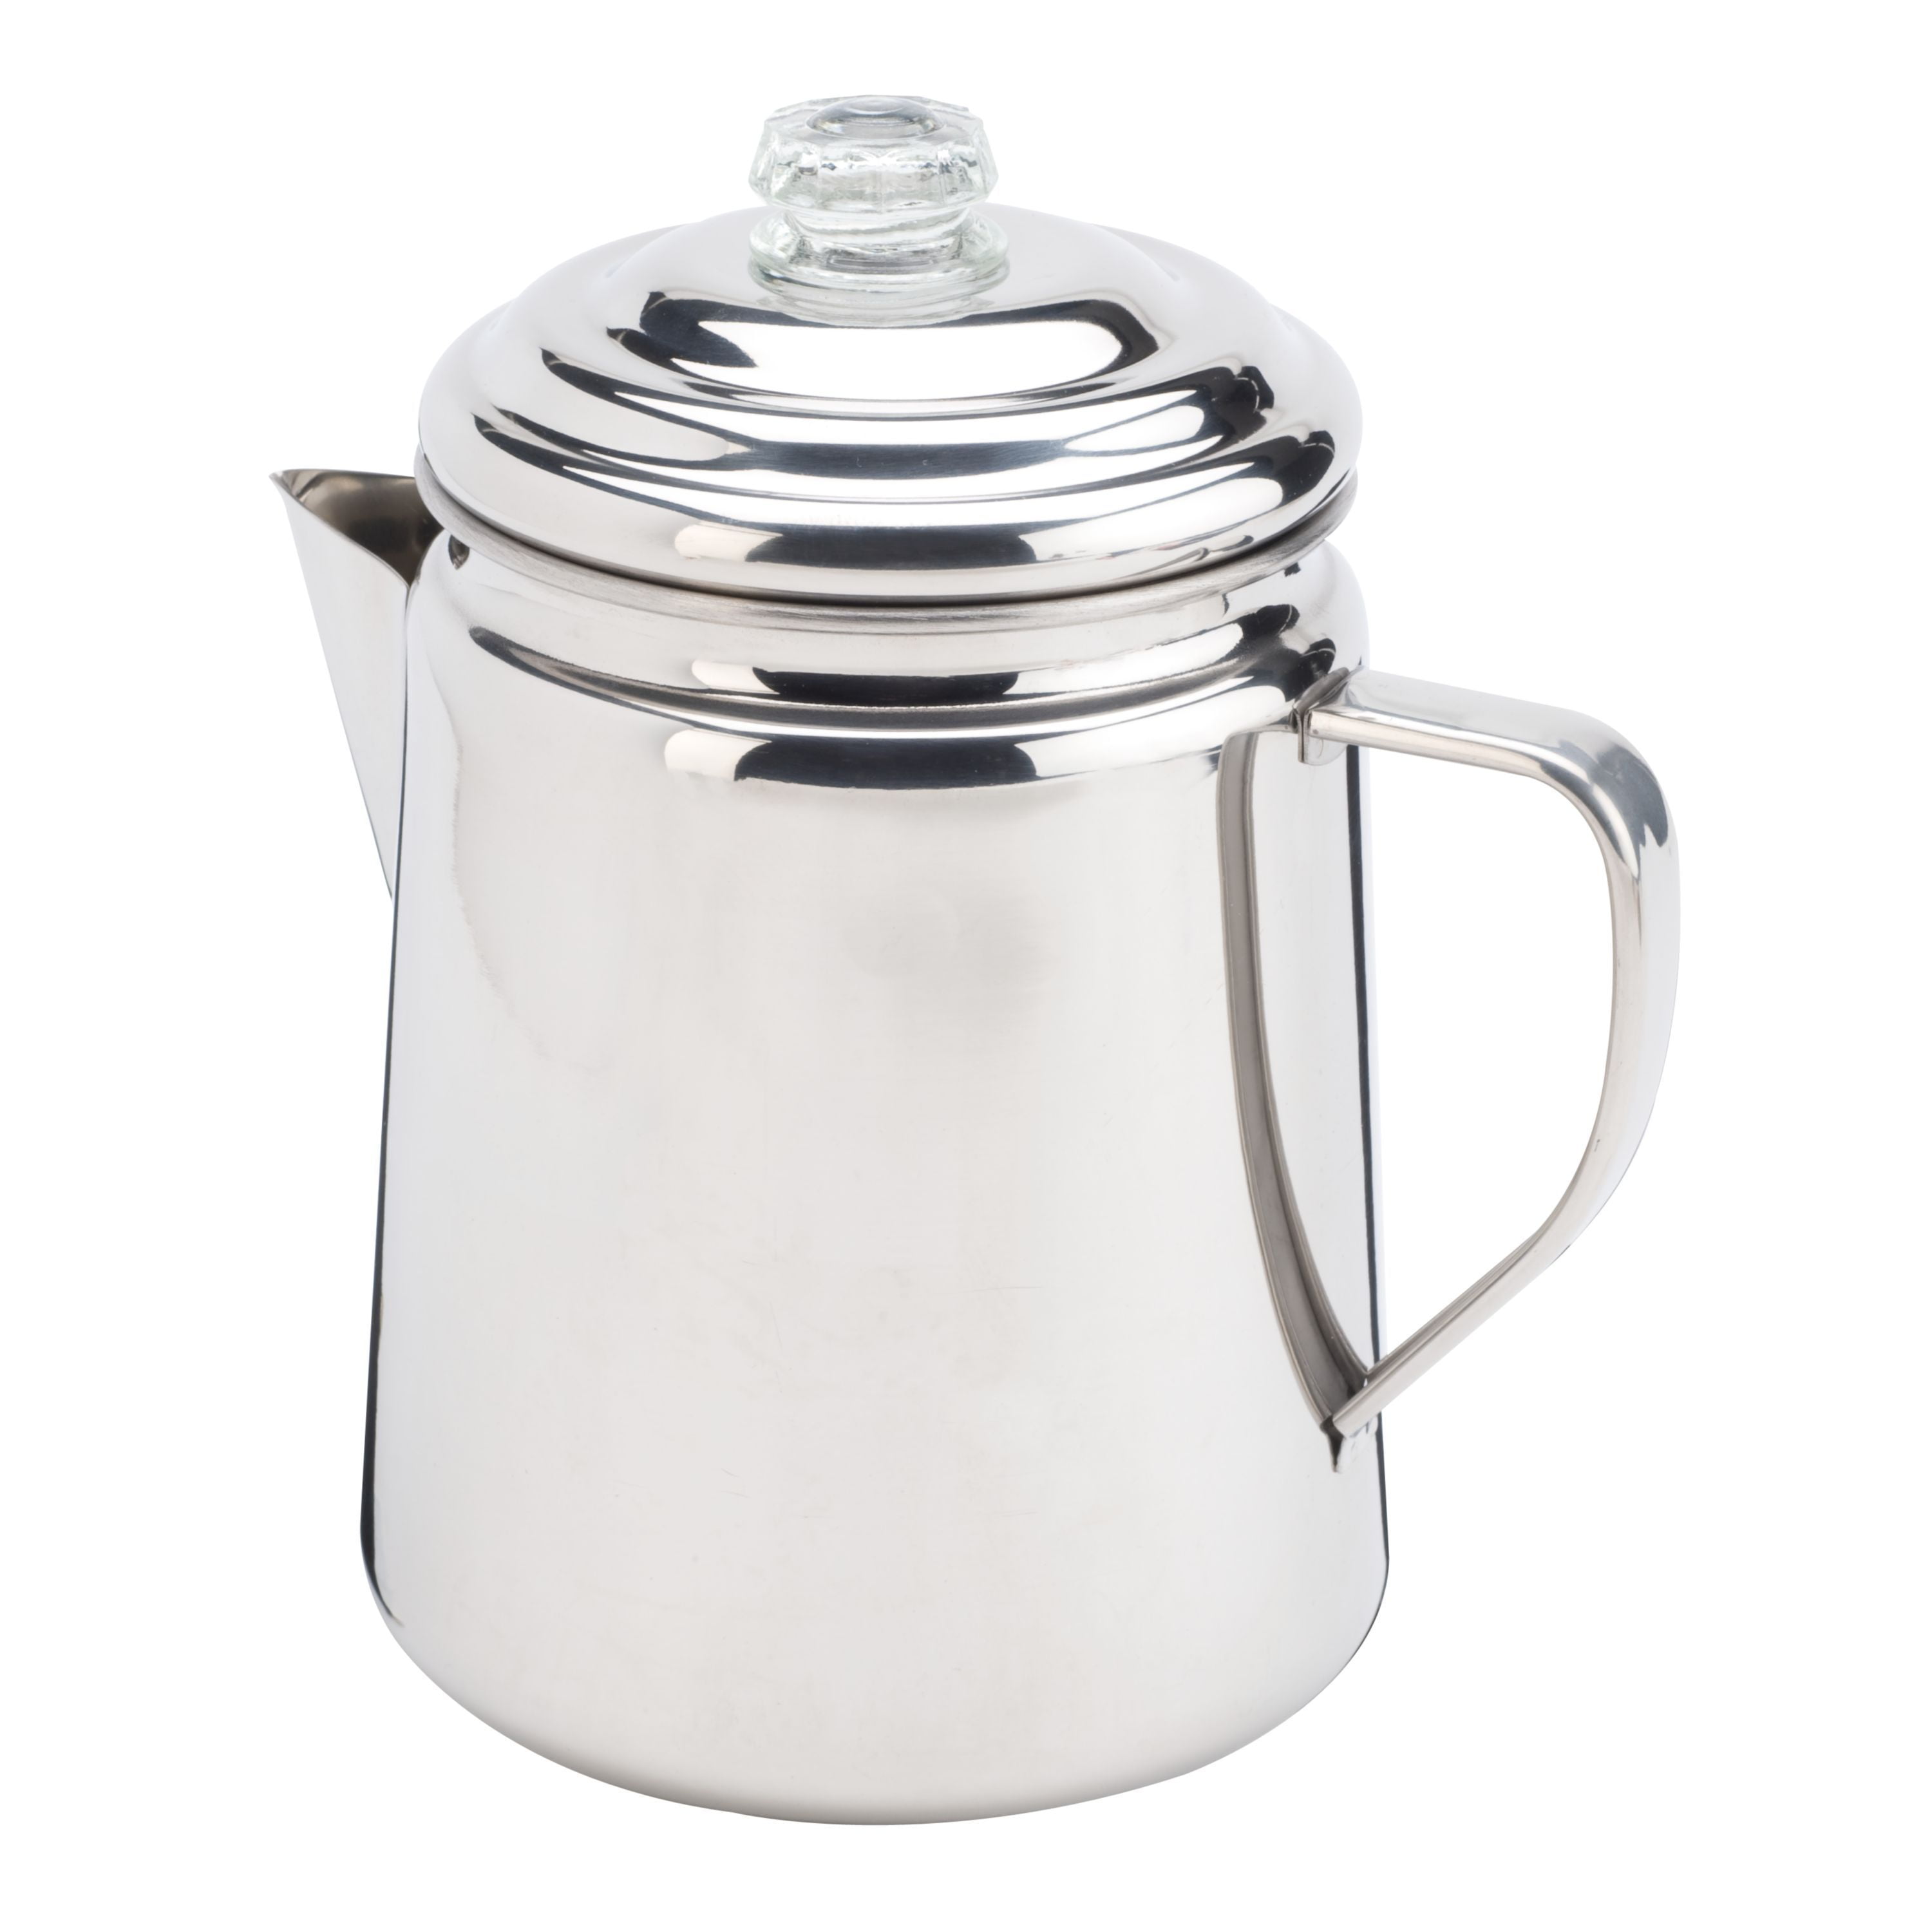 12 Cups Camping Coffee Tea Pot Portable Lightweight Stainless Steel ...